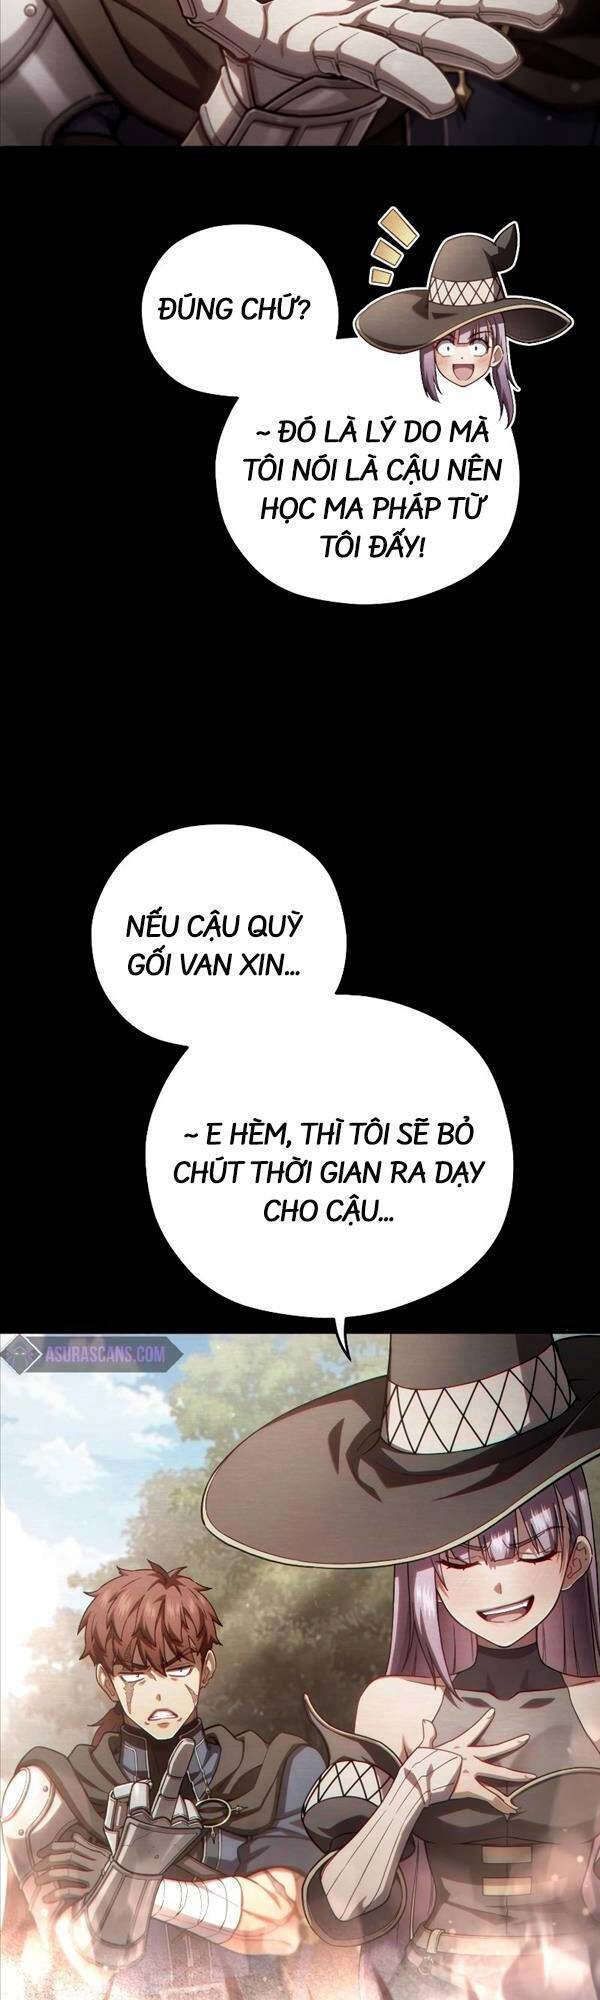 Nghiệt Kiếp Chapter 54 - Trang 11